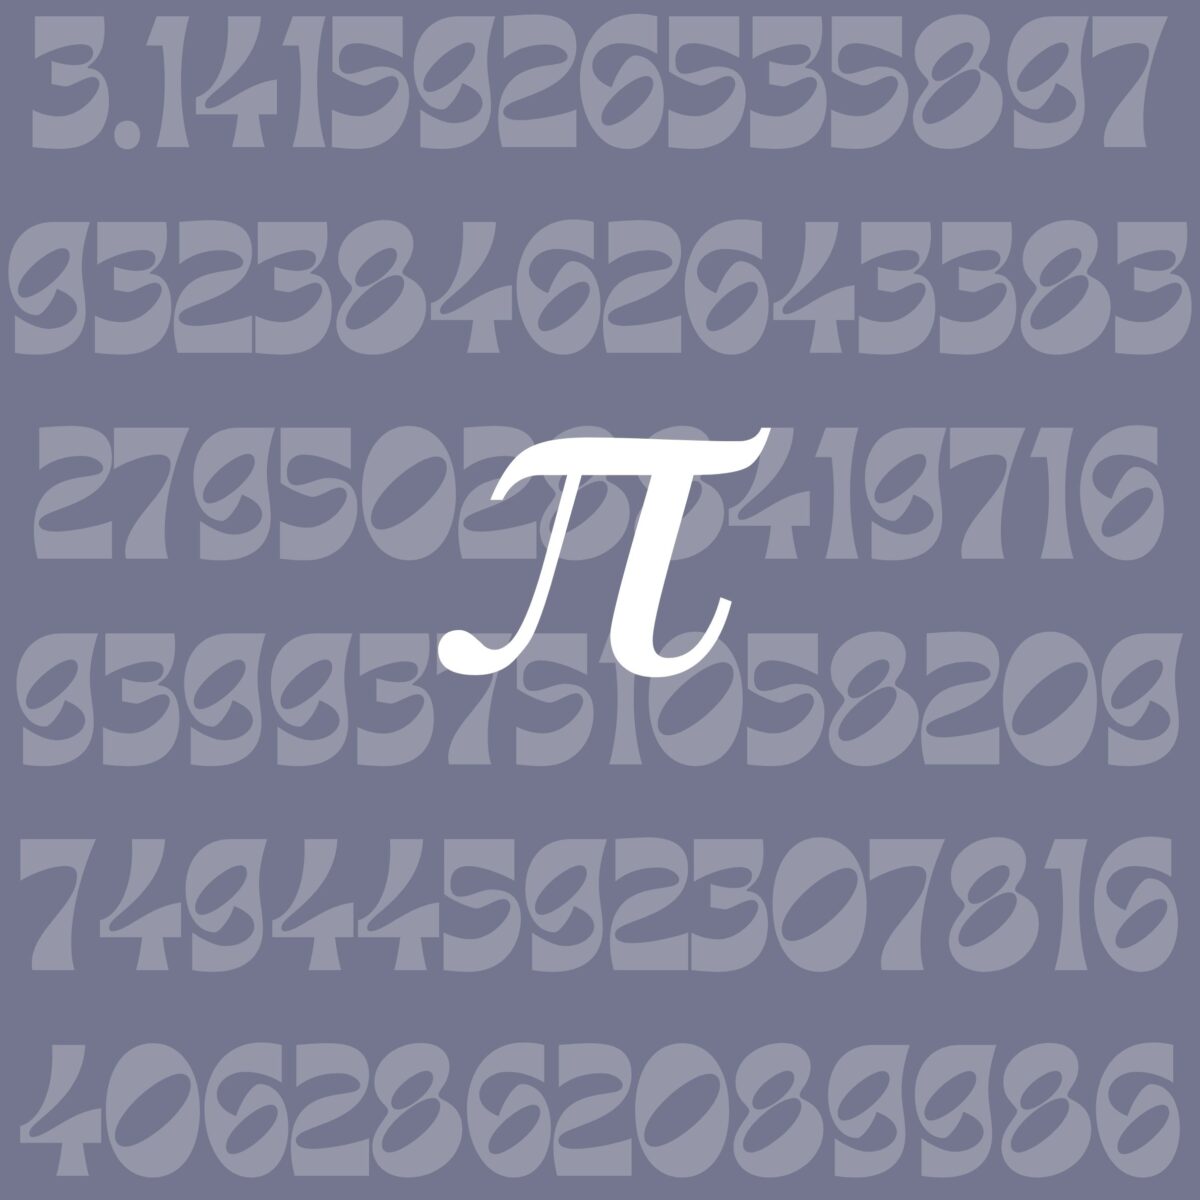 Purple background with grey text that features the first couple dozen digits of pi. Then, the symbol for pi in the center of the image in white.